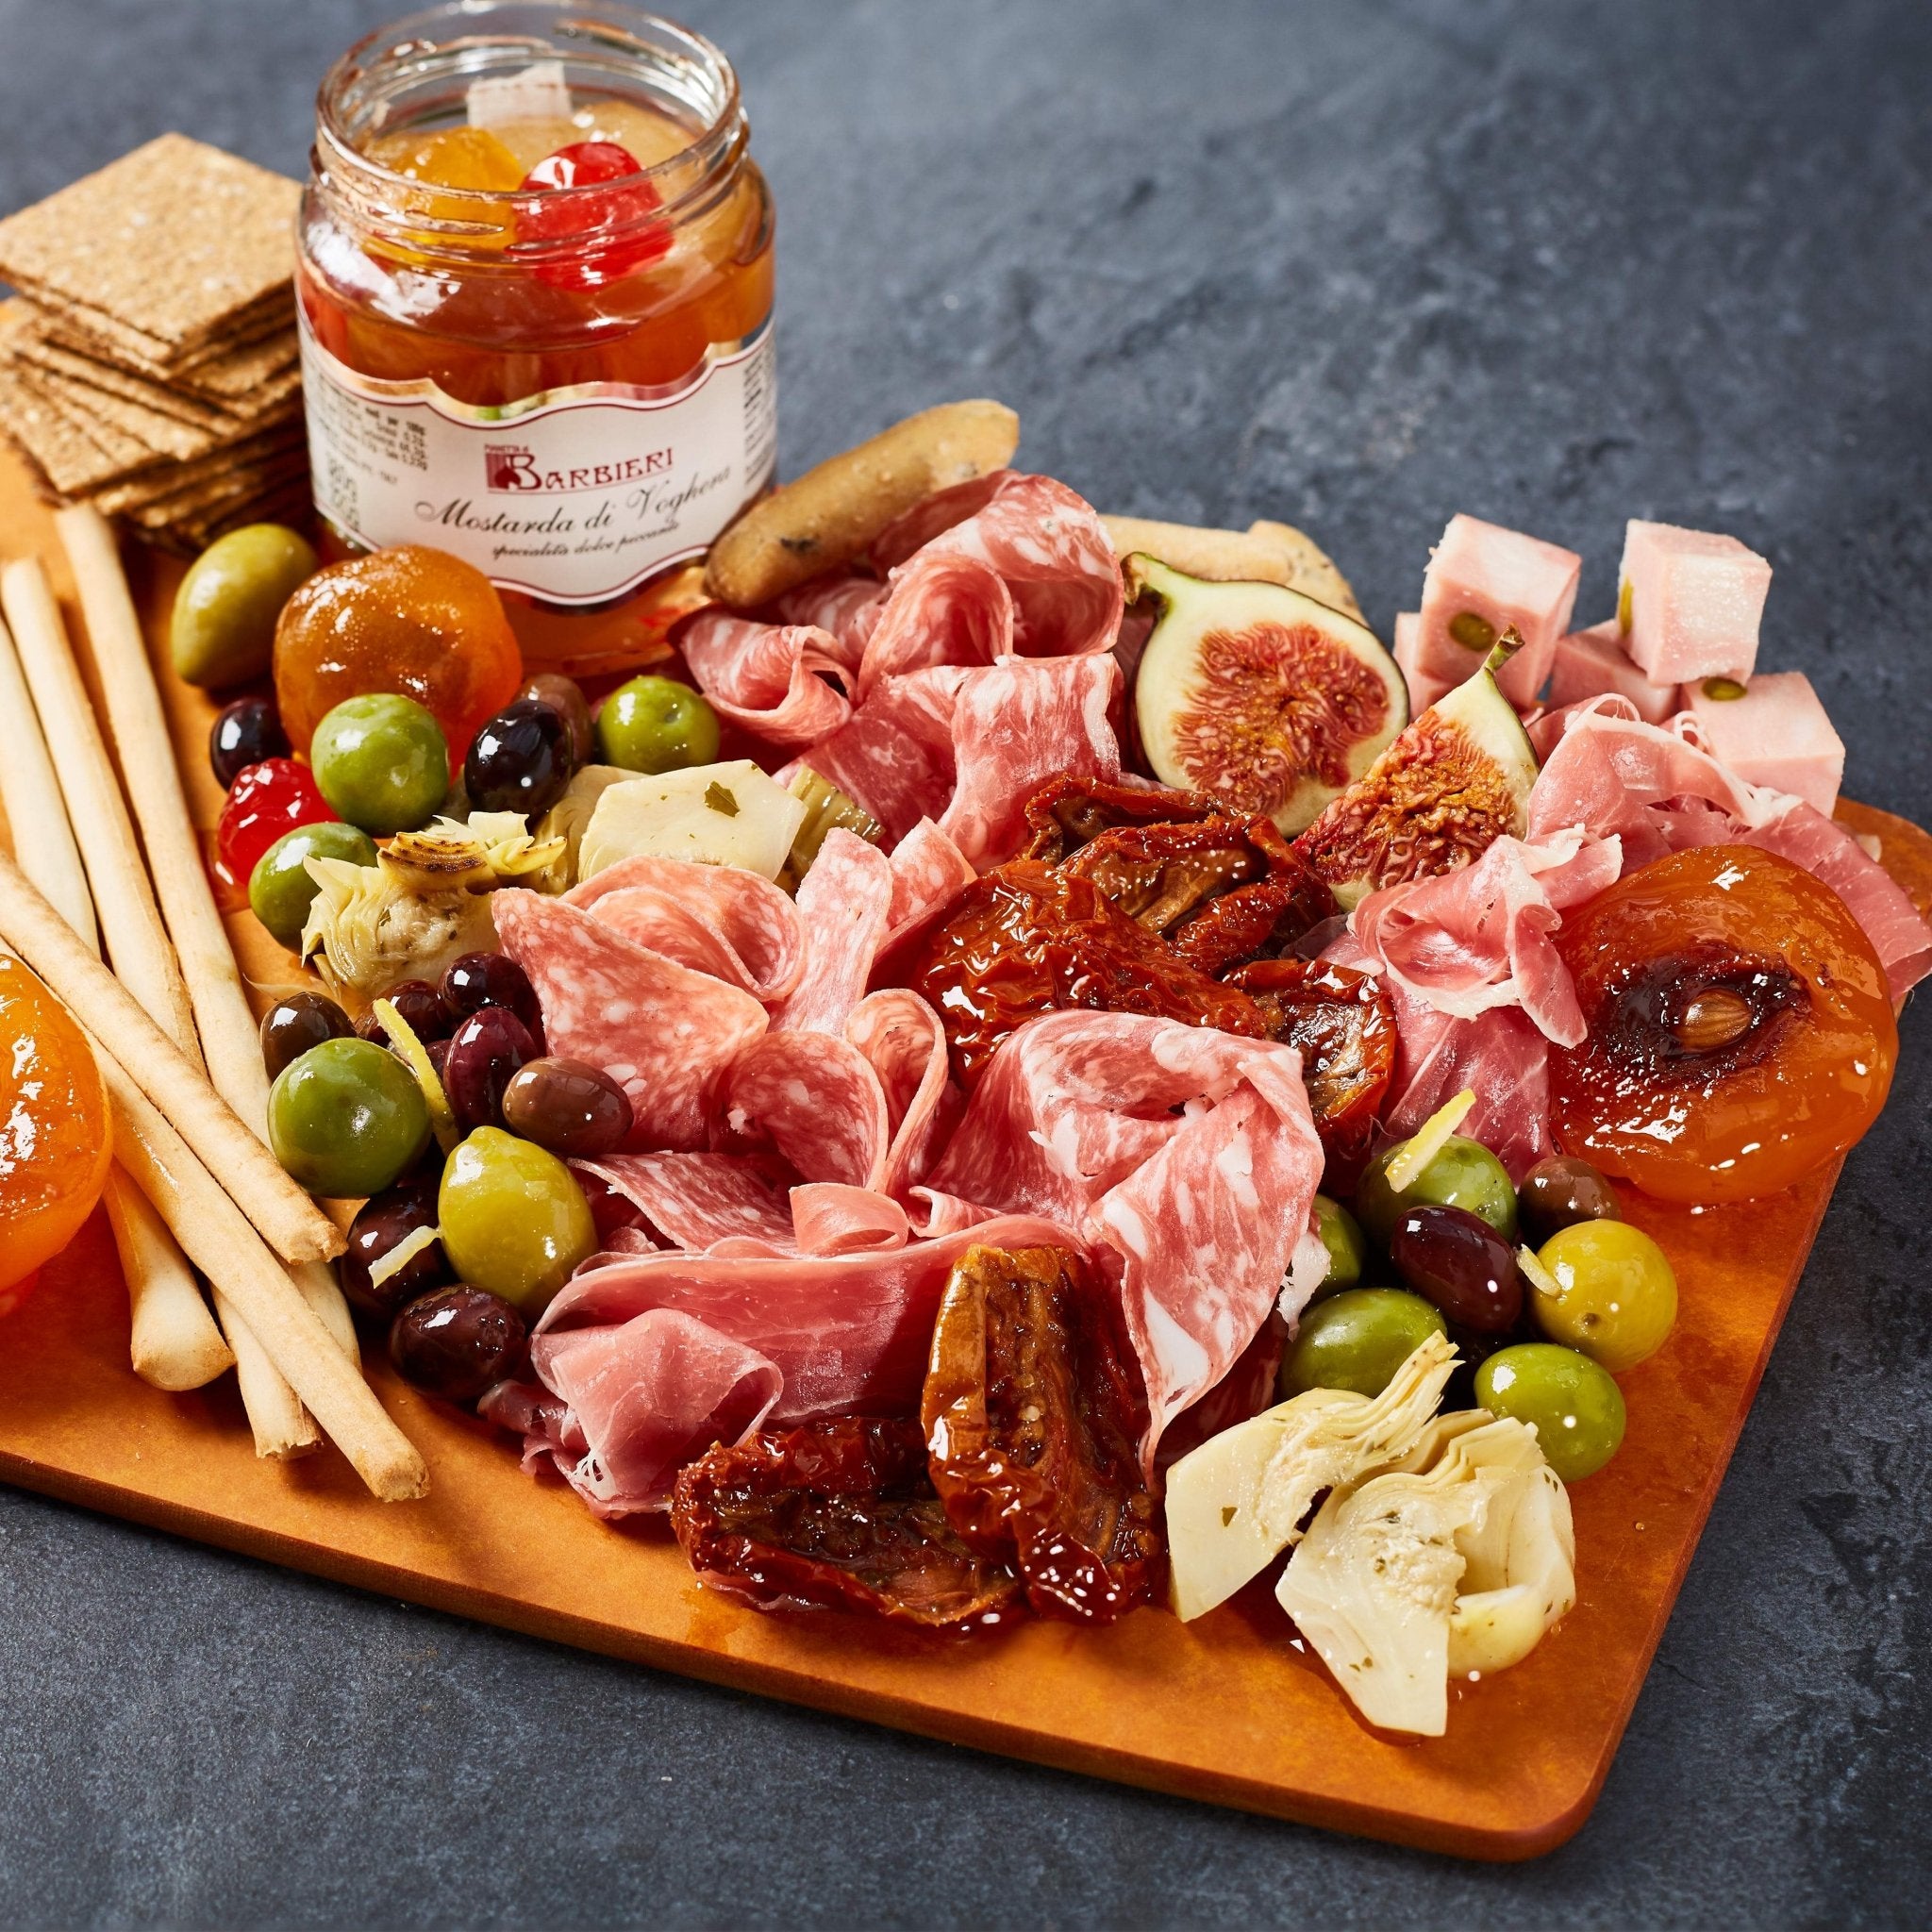 Mostarda platter with meat and anti-pasti.